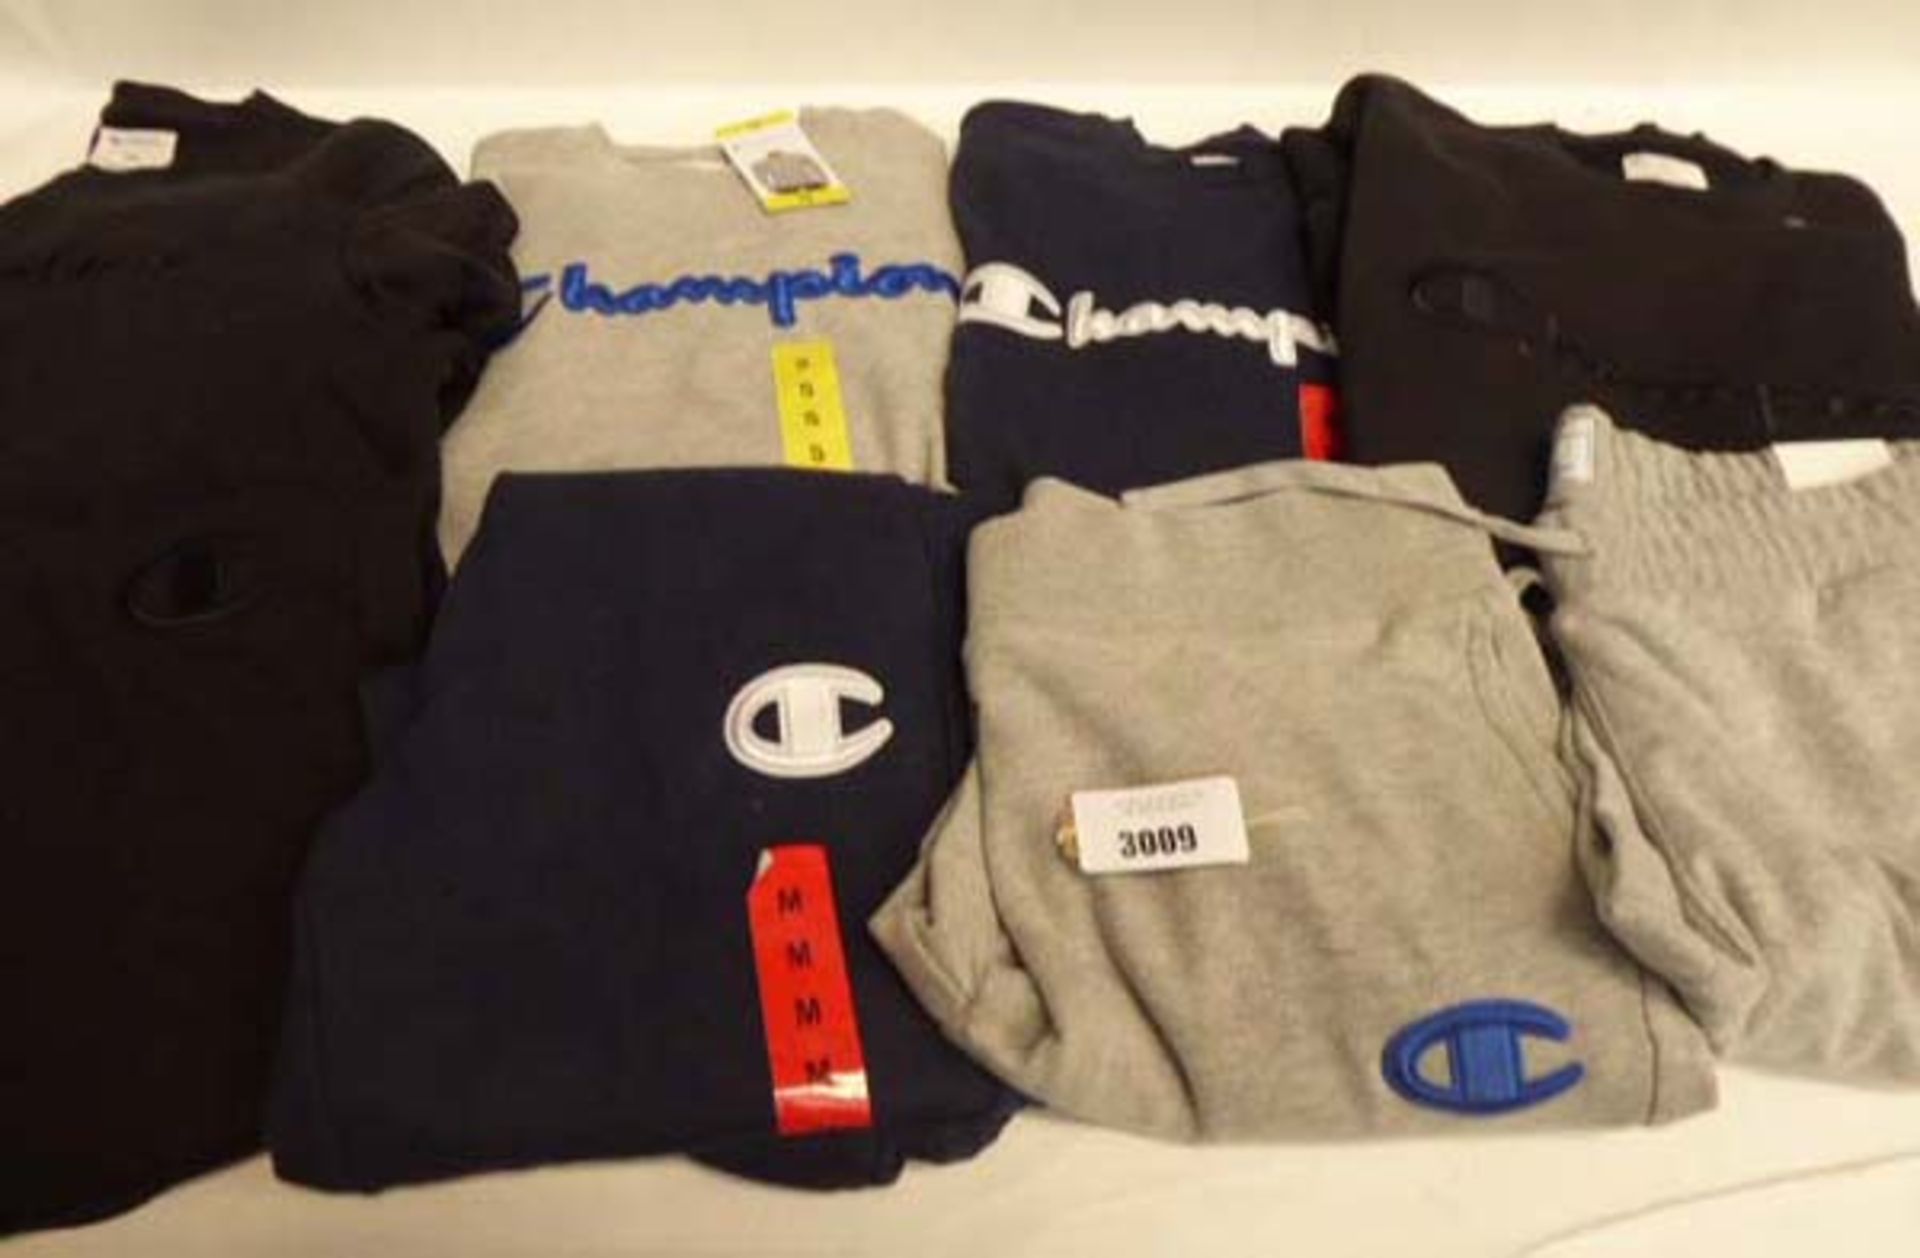 Selection of 8 items of Champion clothing, some used